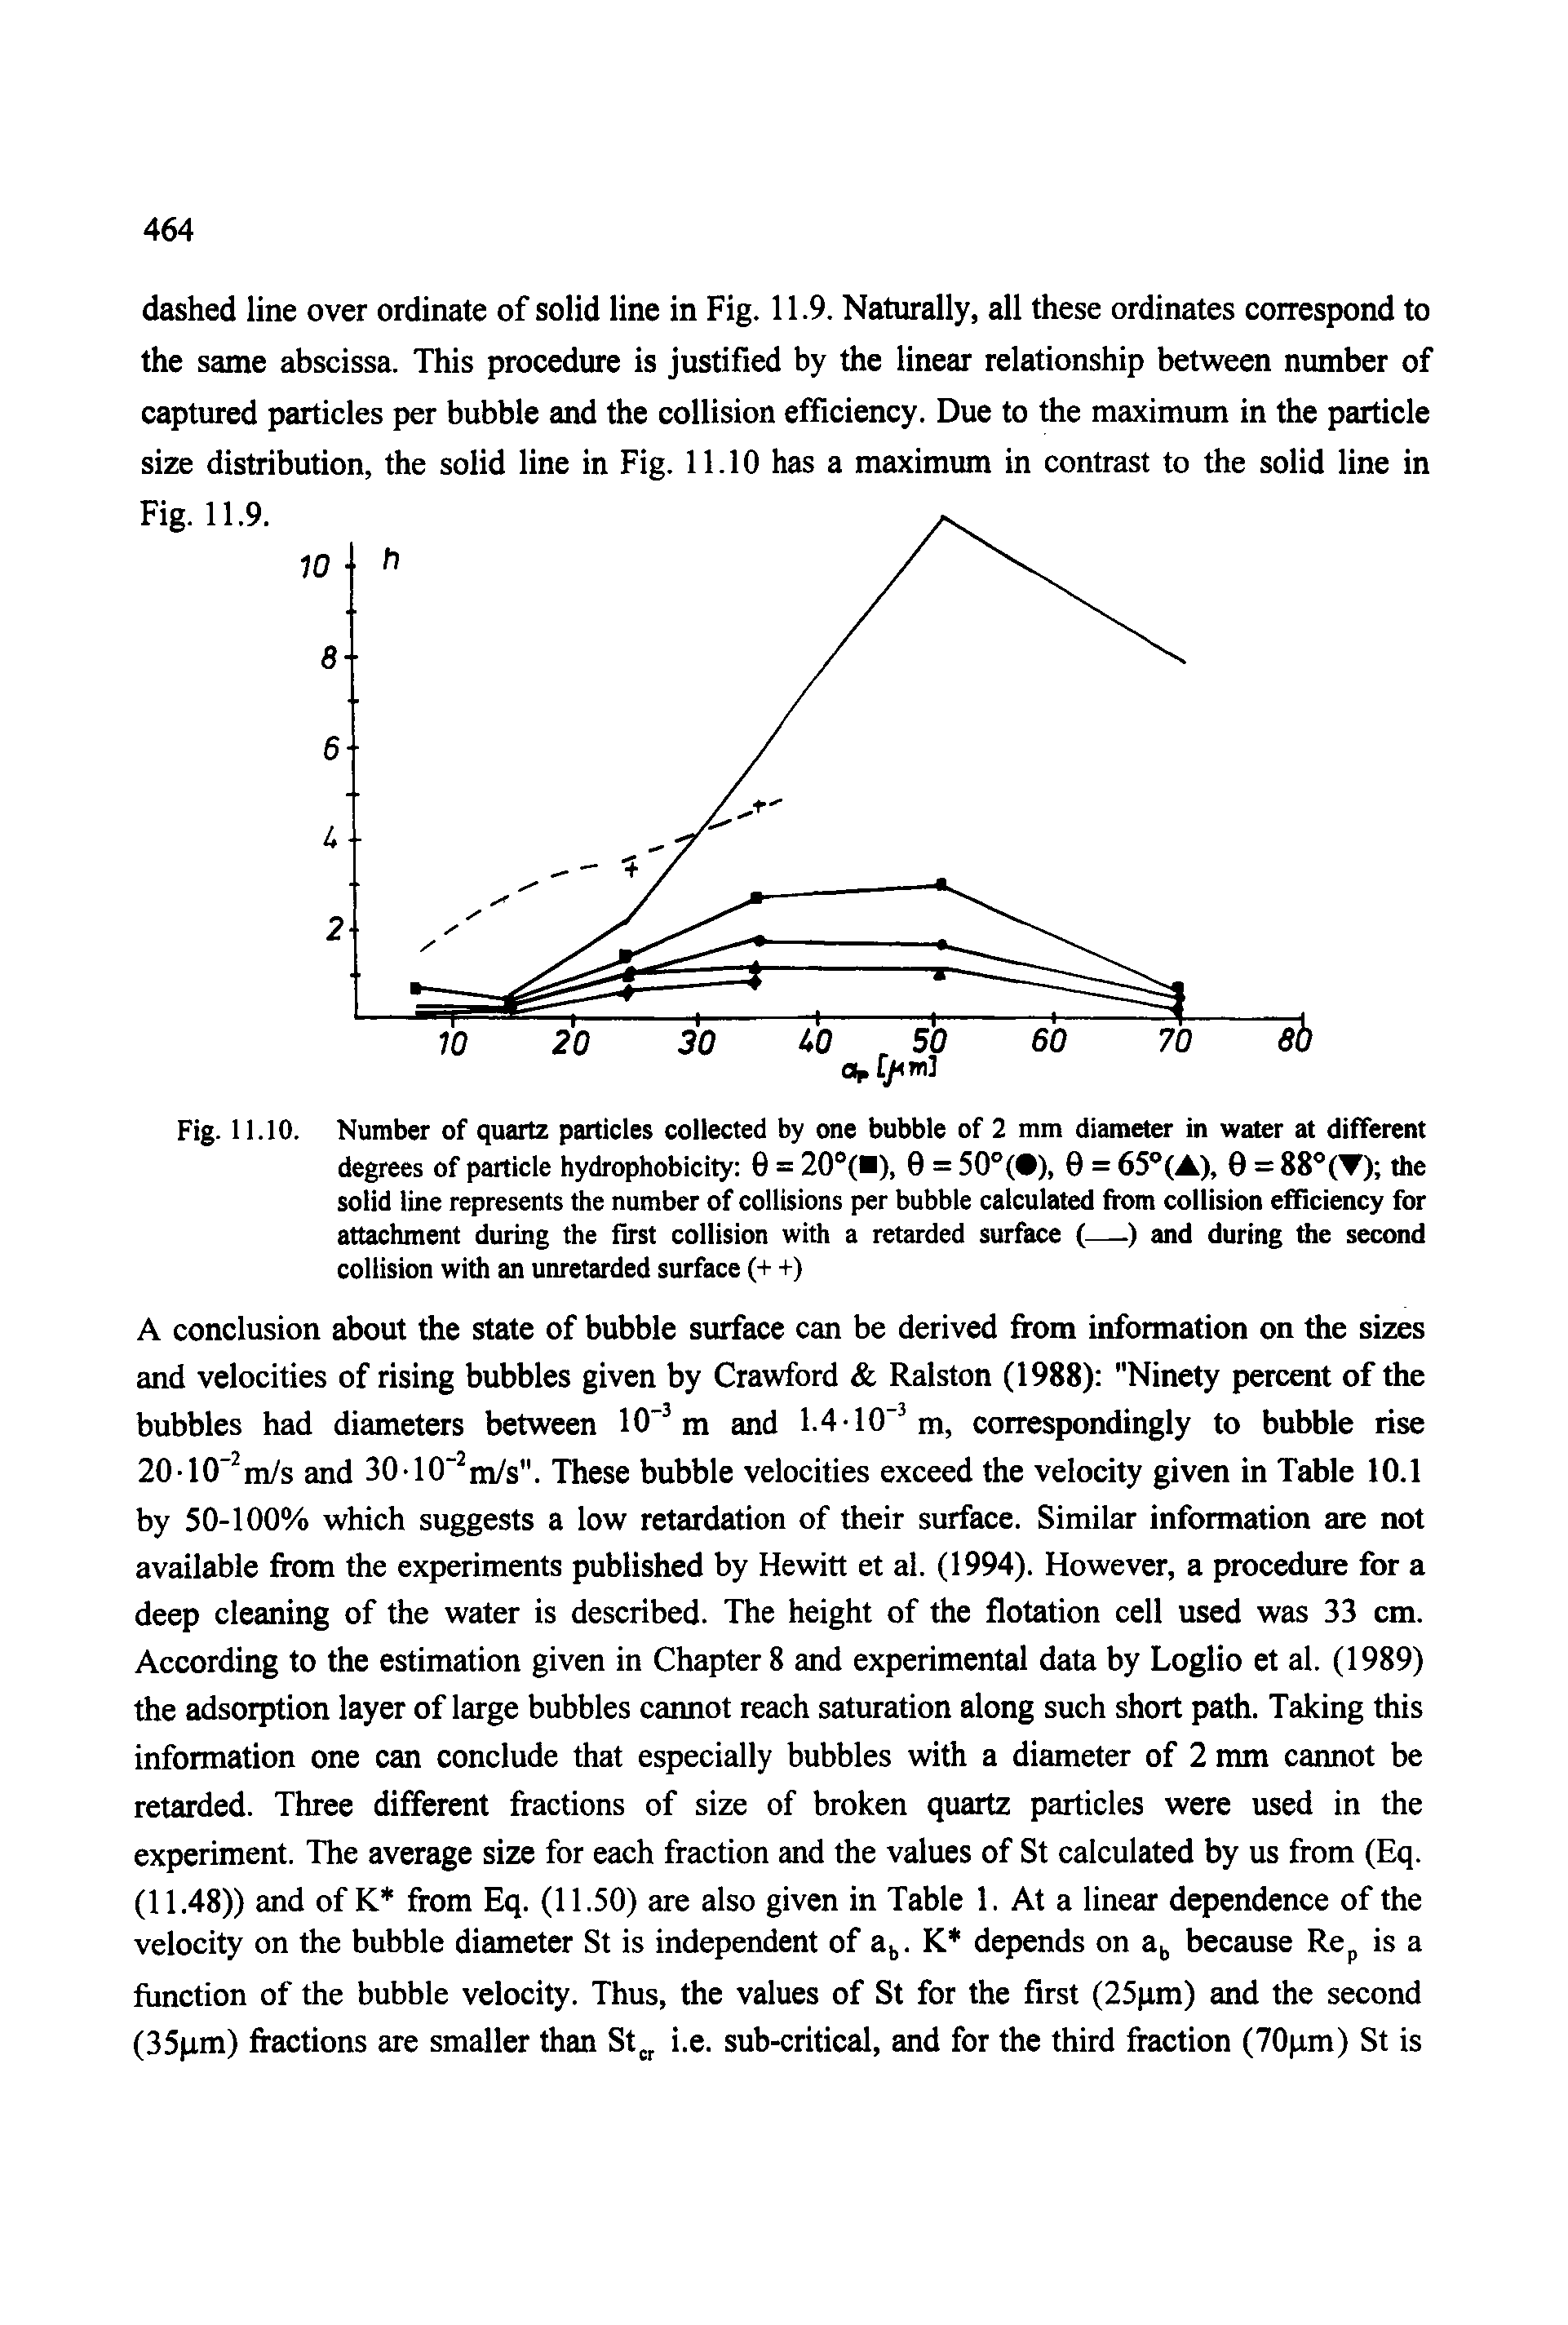 Fig. 11.10. Number of quartz particles collected by one bubble of 2 mm diameter in water at different degrees of particle hydrophobicity 0 = 20 (B), 0 = 50°( ), 0 = 65 (A), 0 = 88°(V) the solid line represents the number of collisions per bubble calculated from collision efficiency for attachment during the first collision with a retarded surface (—.) and during the second collision with an unretarded surface (+ +)...